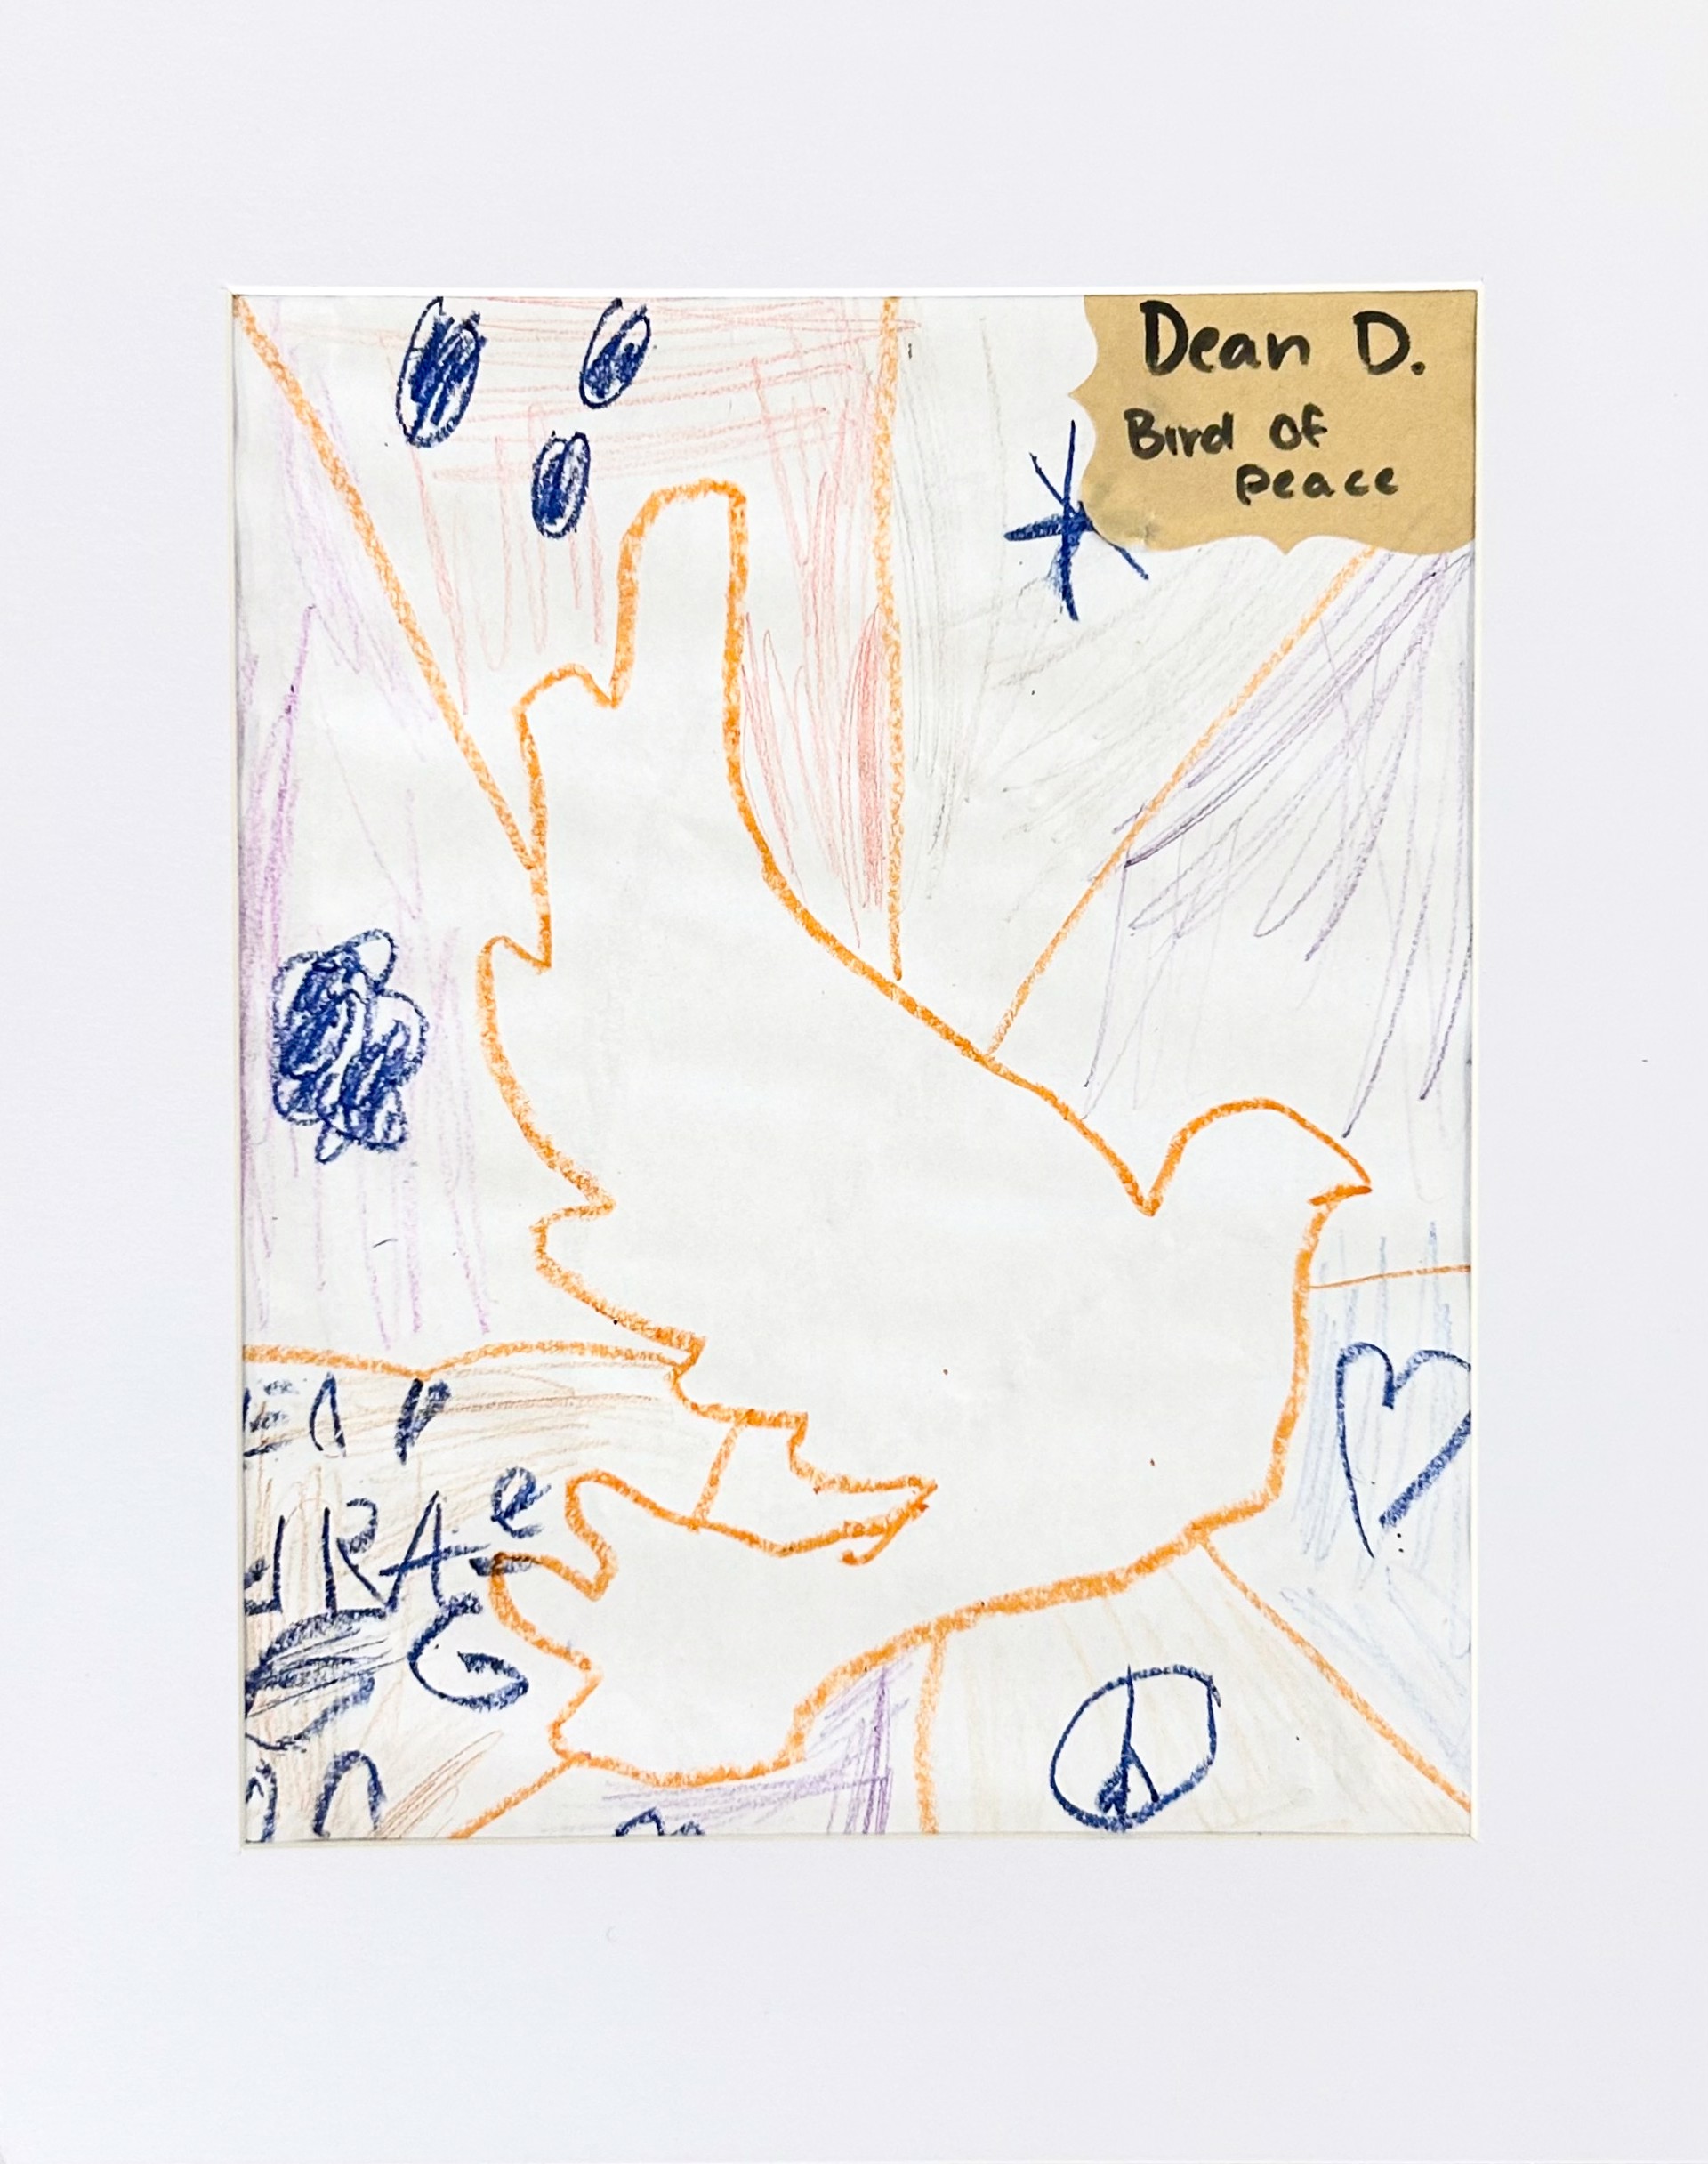 "Bird of Peace" by Dean D. by Autism Academy